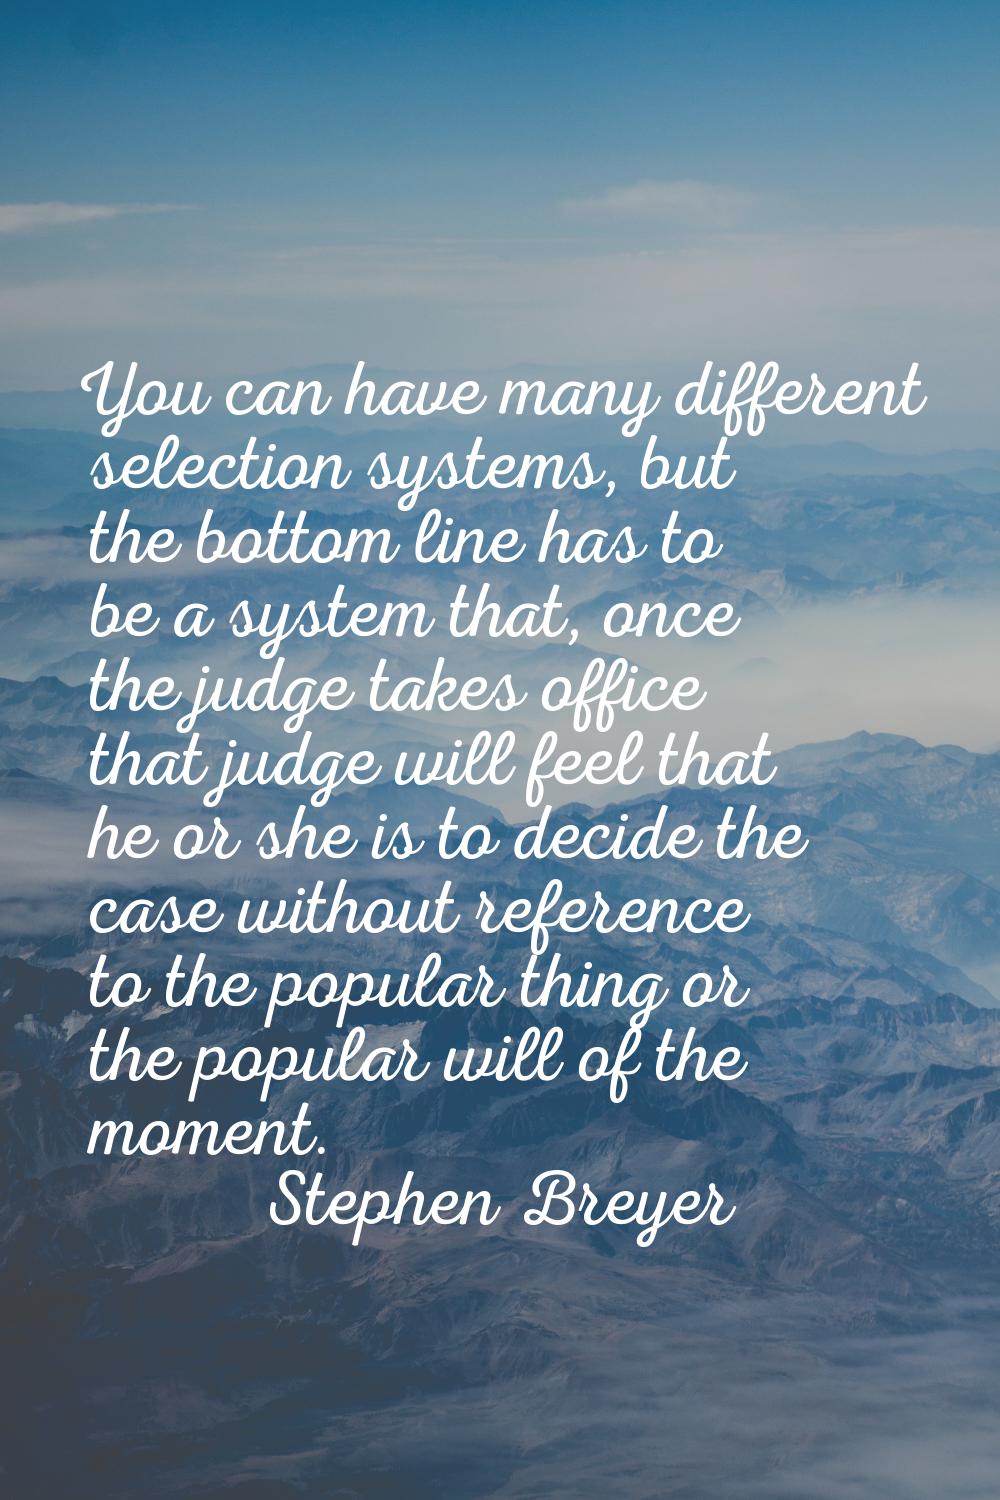 You can have many different selection systems, but the bottom line has to be a system that, once th